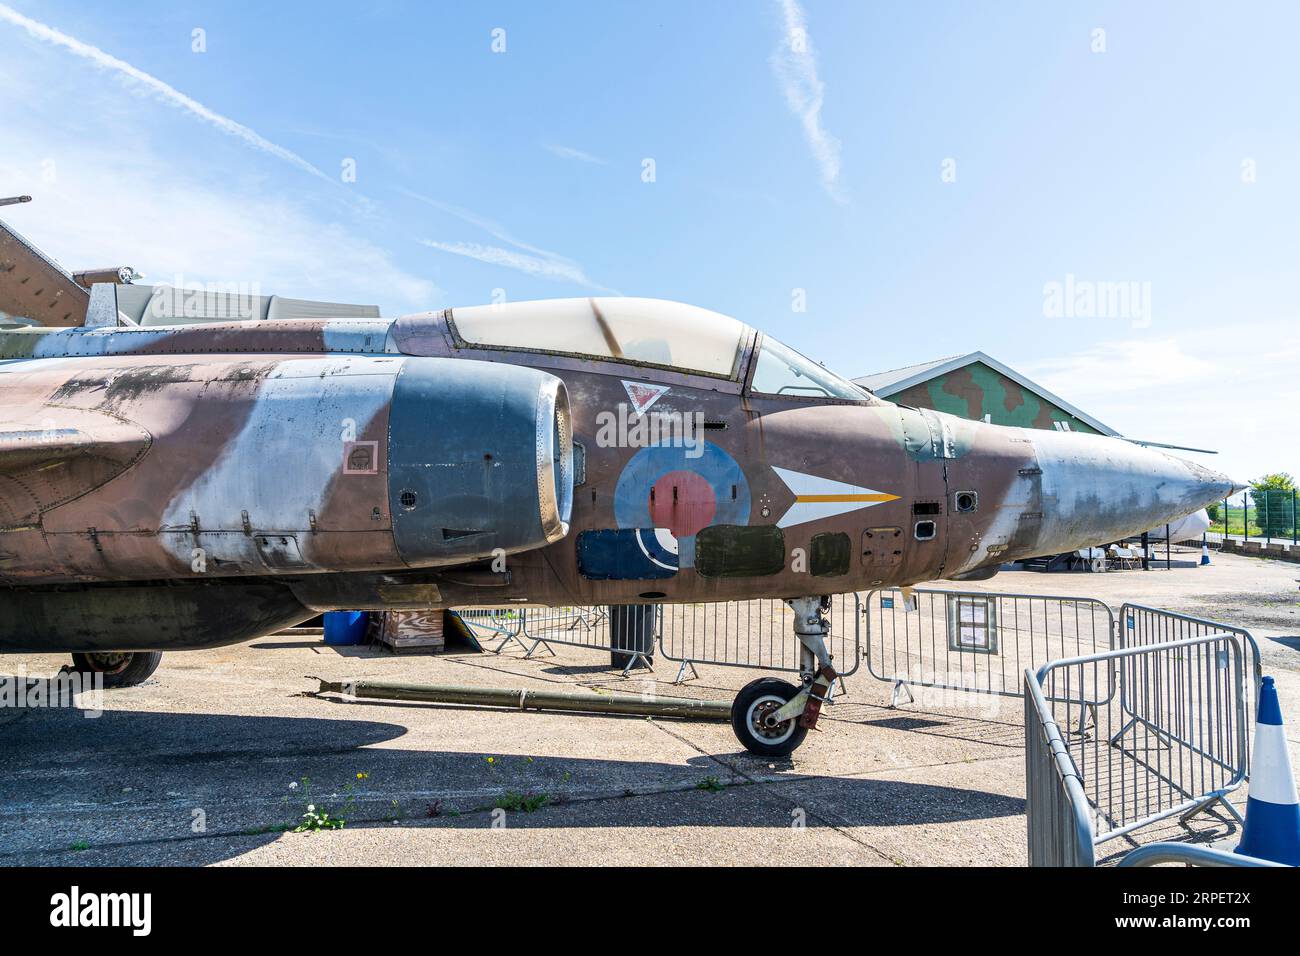 RAF fighter bomber Blackburn Buccaneer, with its wings folded, on display outside at the RAF Manston History Museum in Kent. Sunny, blue sky. Stock Photo